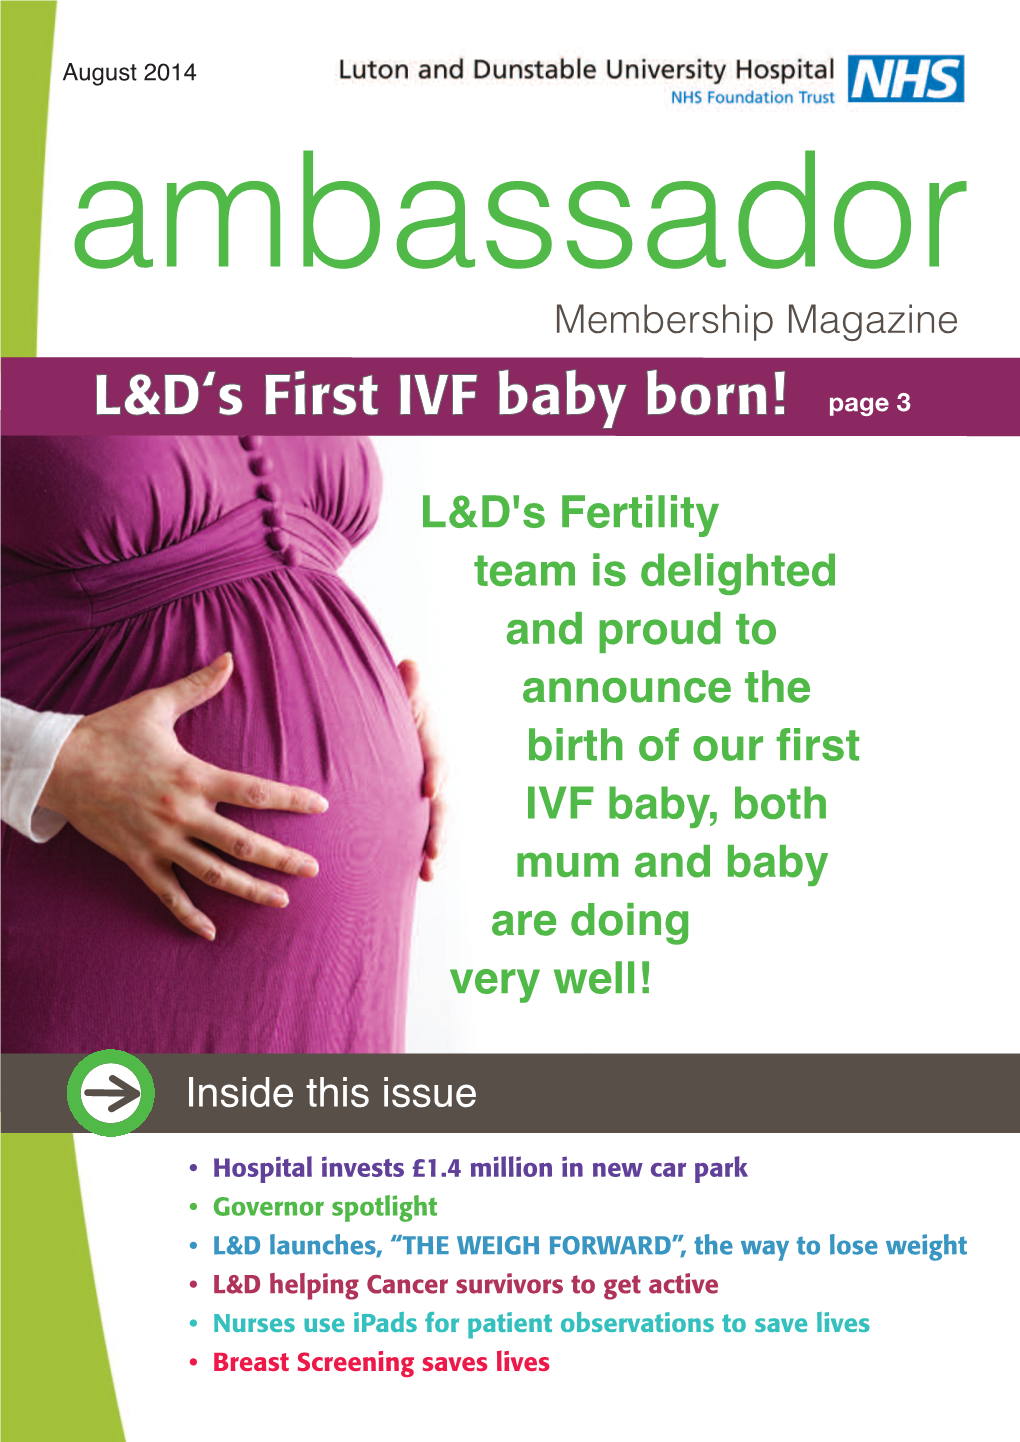 L&D's First IVF Baby Born!